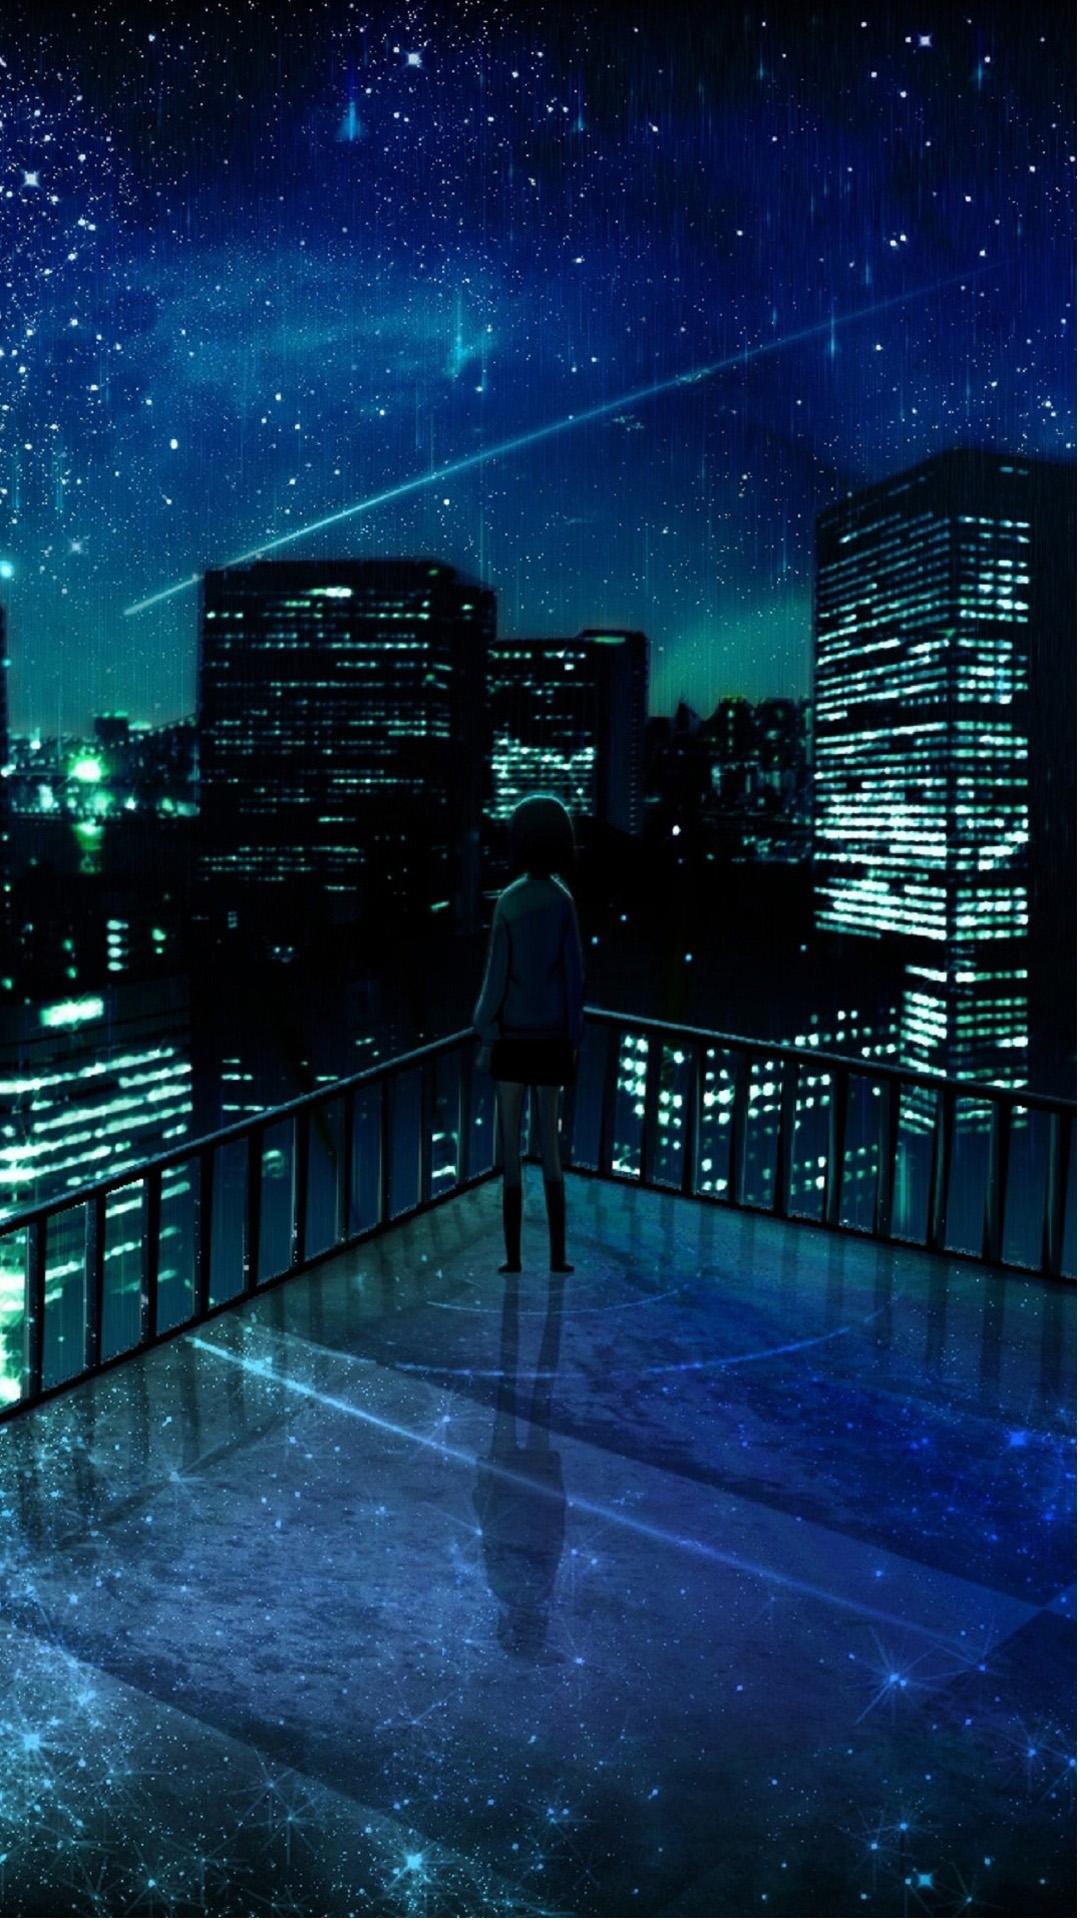 Girl Looking At Falling Star Android Wallpaper free download